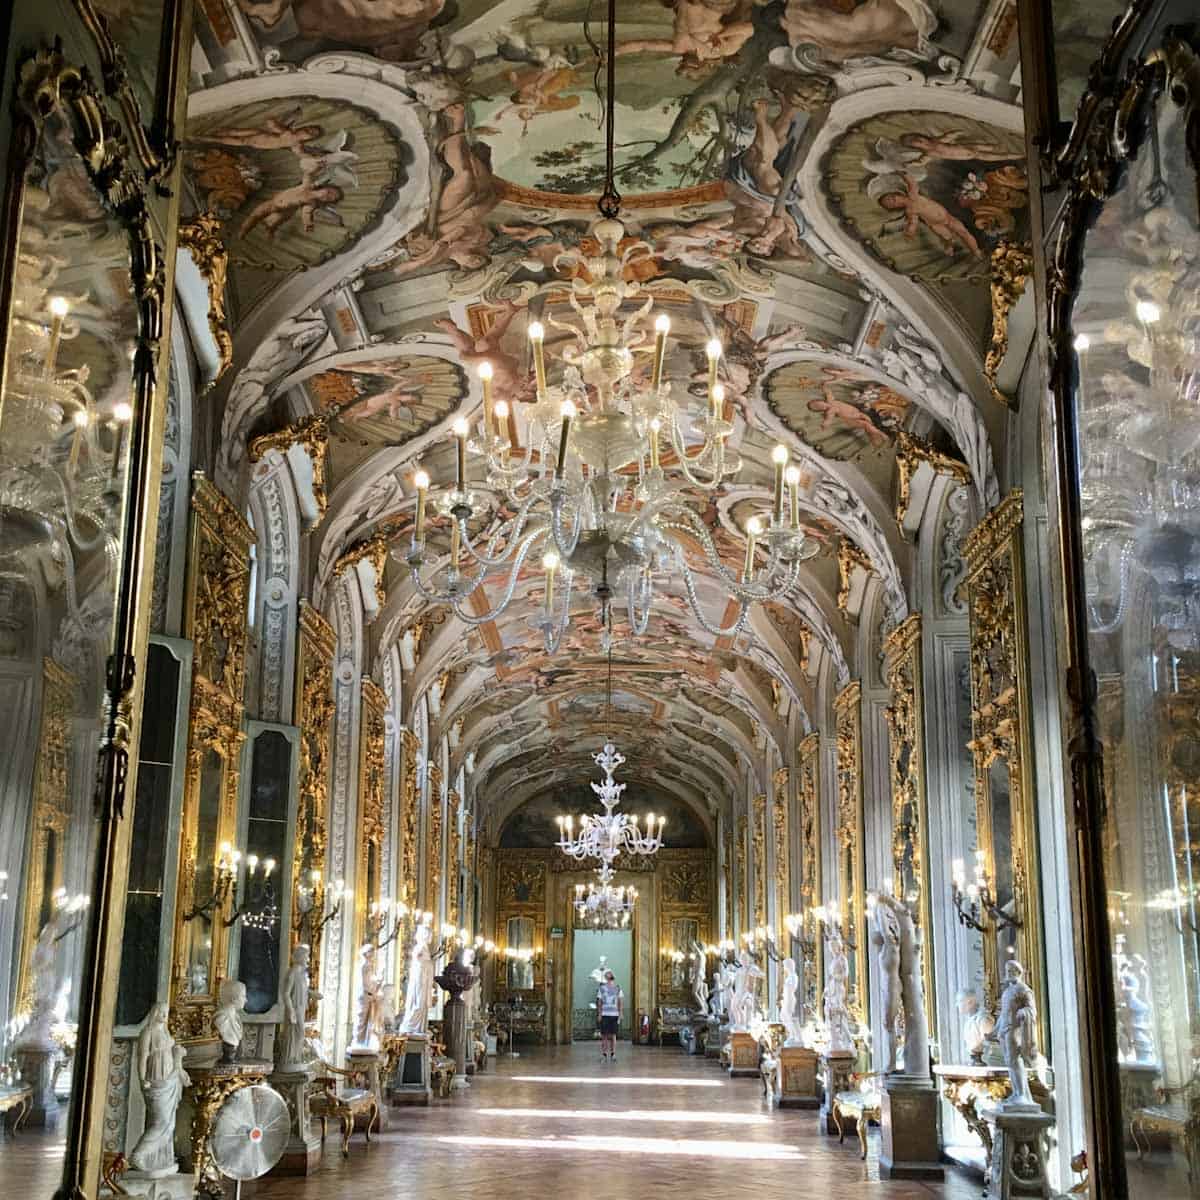 Lavish hallway with chandeliers, statures, and ornate murals at Doria Pamphilj Galleria